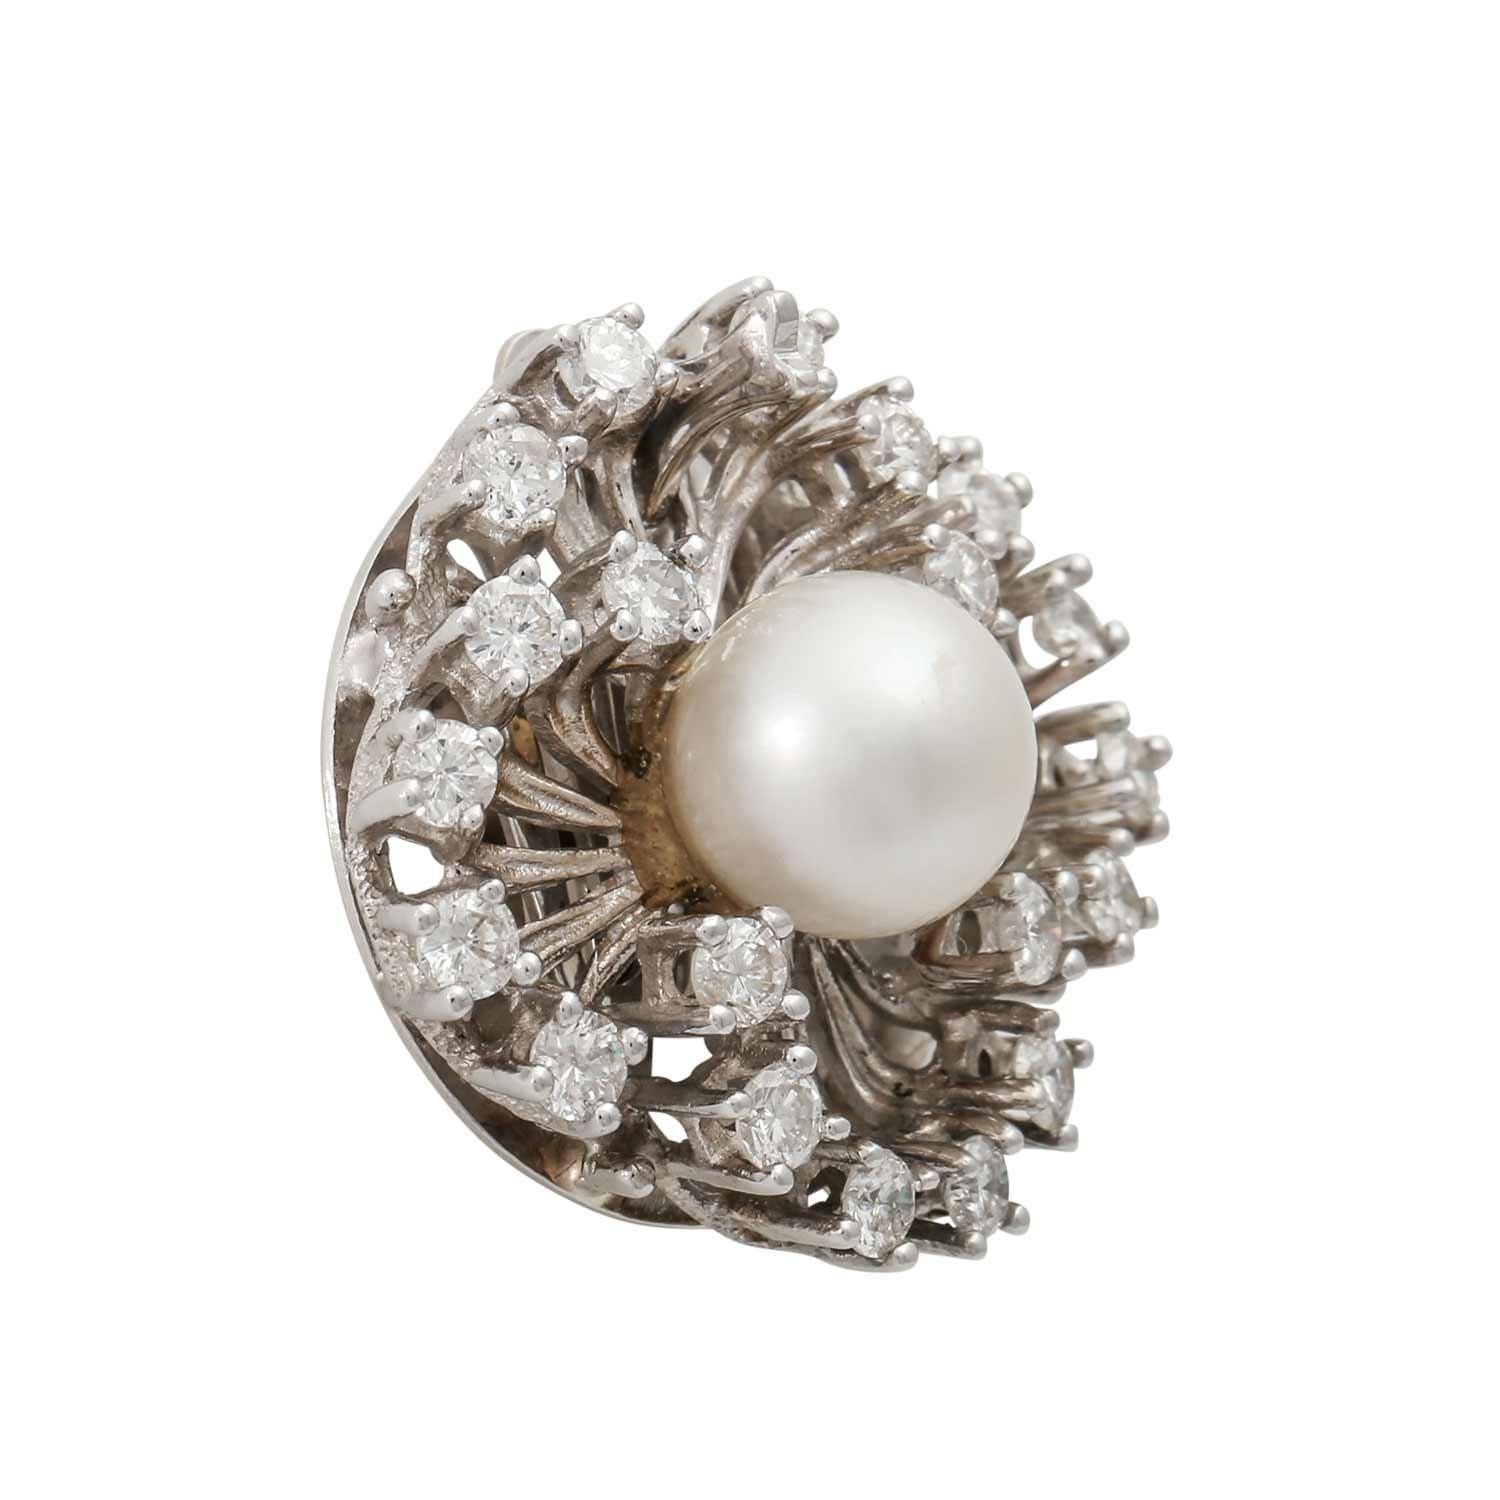 Clasp with cultured pearl approx. 8 mm, 20 brilliant-cut diamonds total approx. 1 ct W/SI-P, WG 14K, D: approx. 2 cm.
